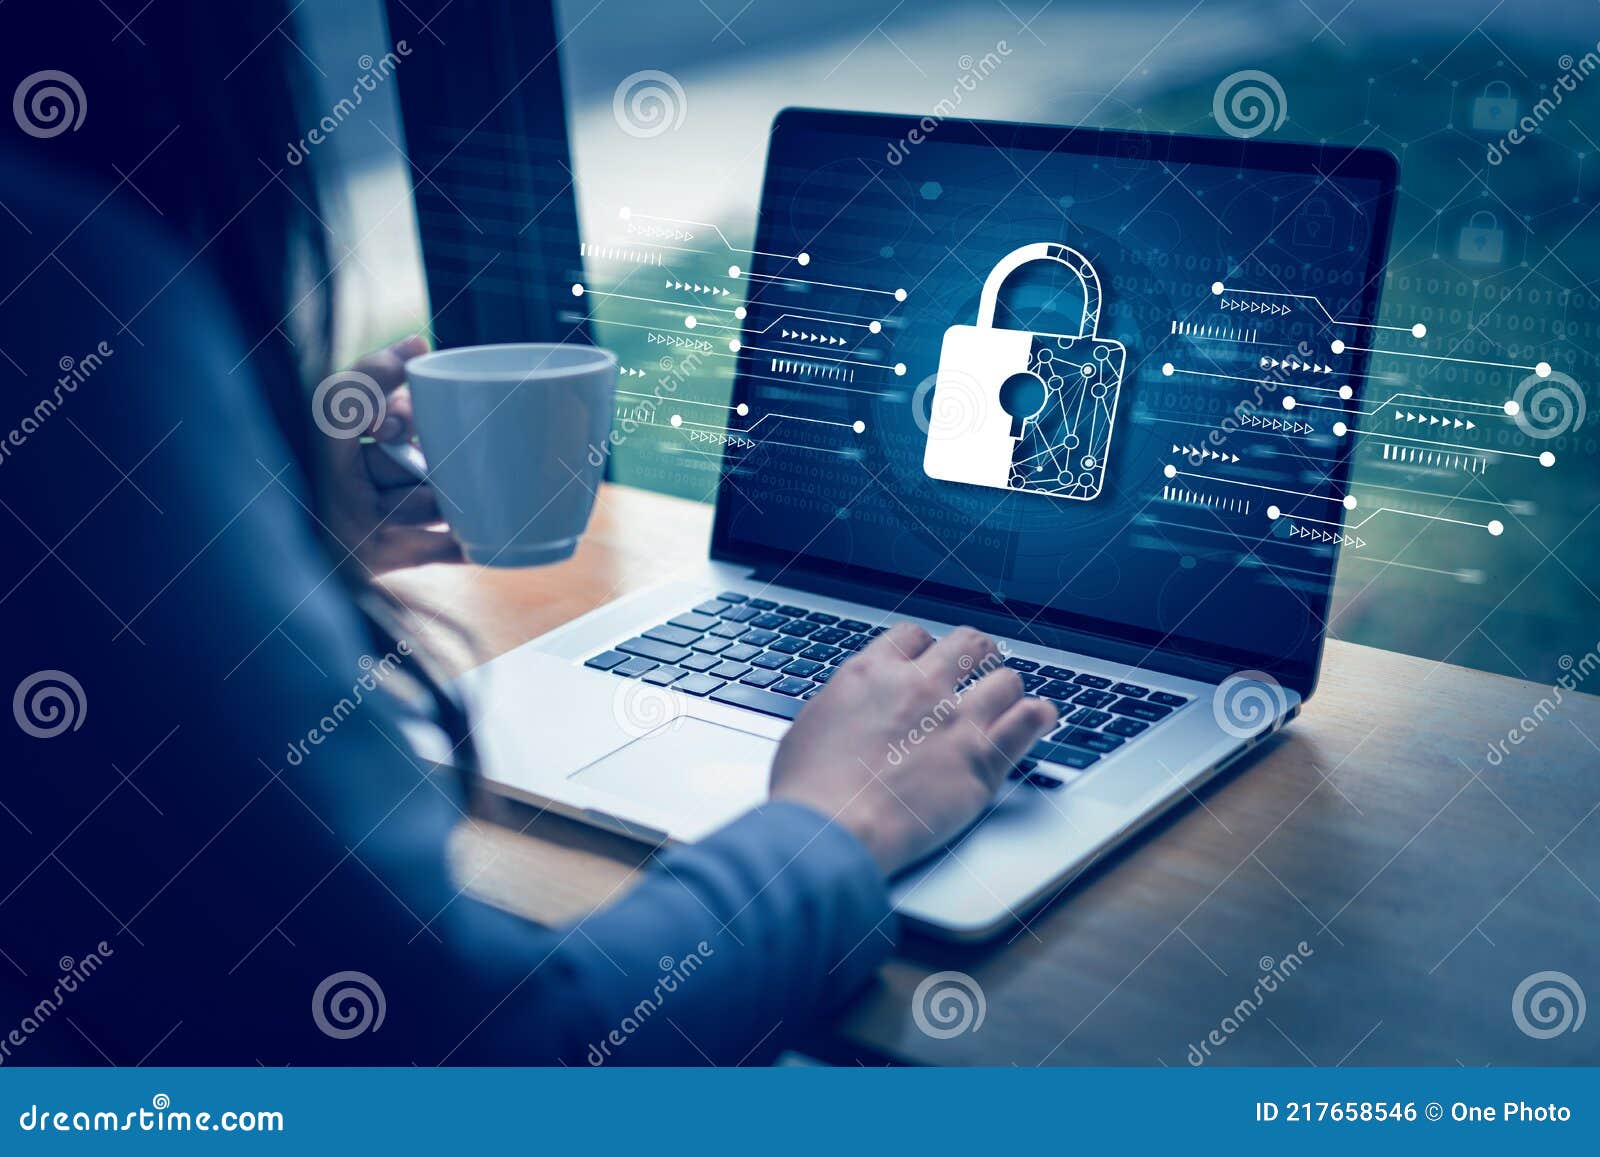 cyber security business  technology antivirus alert protection security and cyber security firewall cybersecurity and information